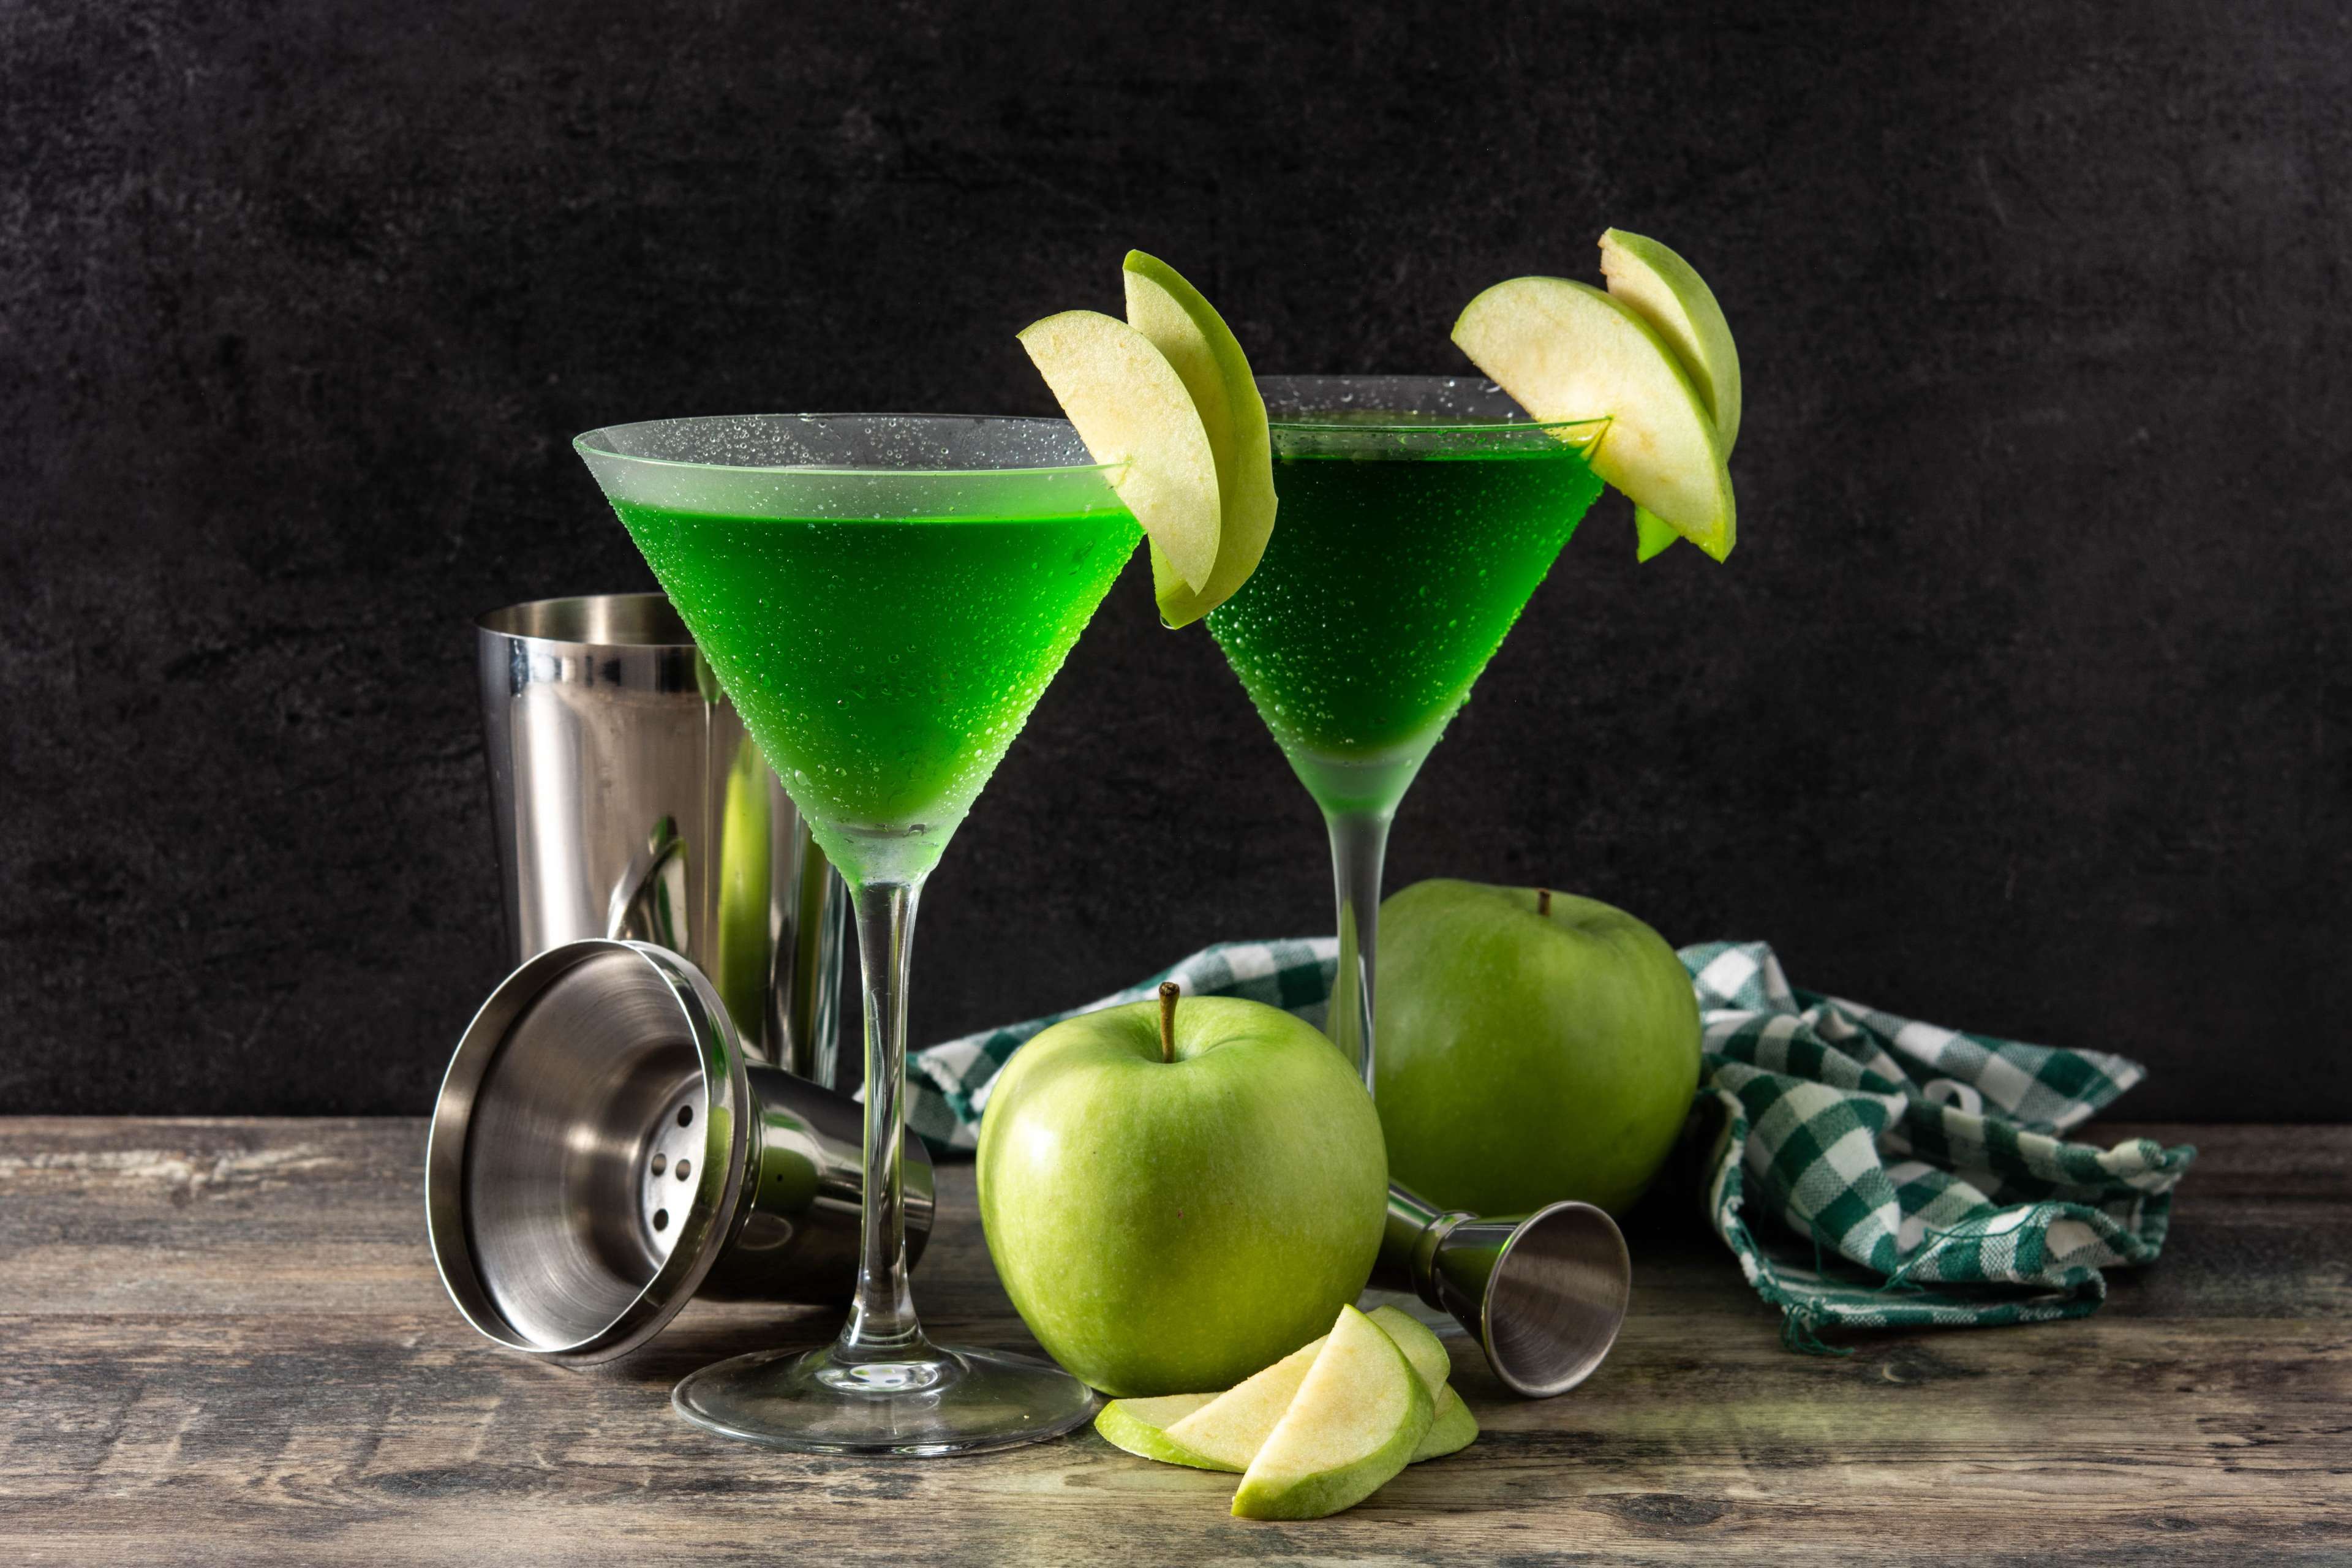 61ad3e504246928f6985be60_Green%20appletini%20cocktail%20in%20glass%20on%20wooden%20table.jpeg